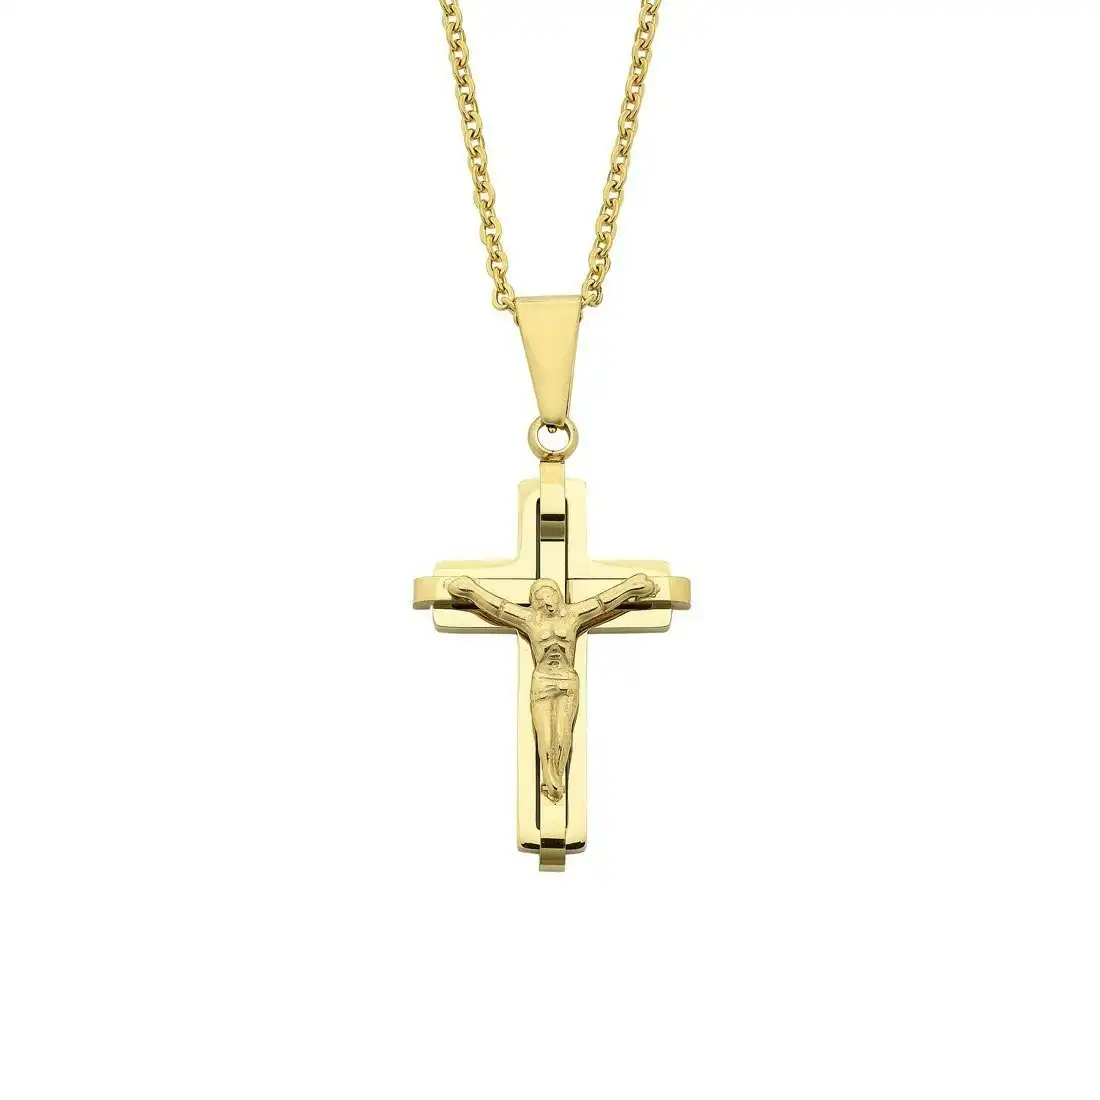 50cm Yellow Stainless Steel Cross Necklace